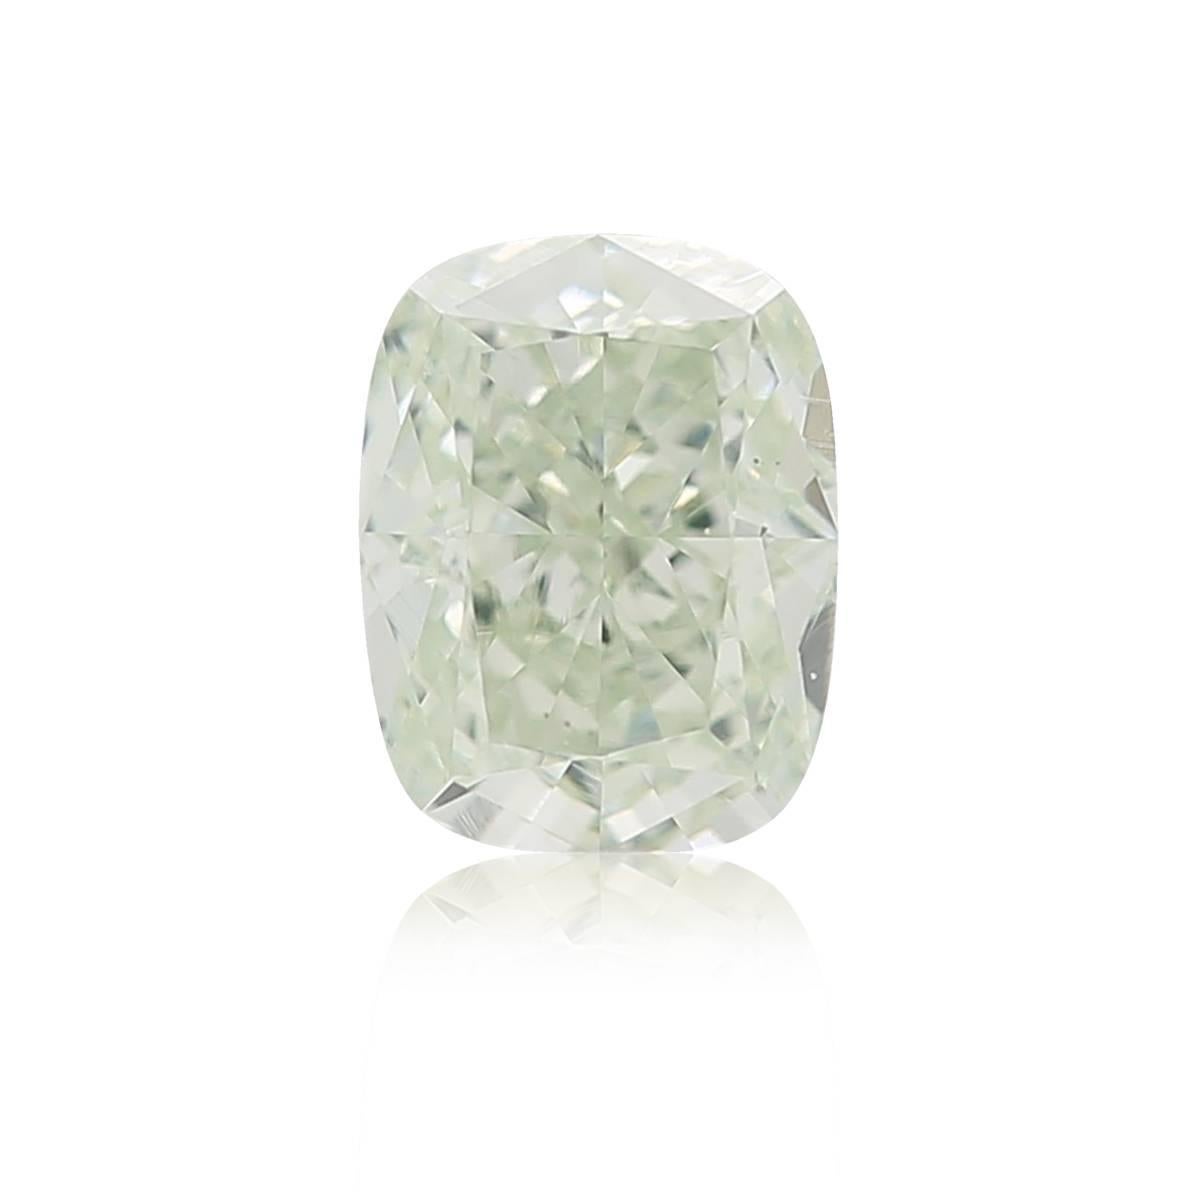 Ultra rare, GIA certified, 1.01 carat, fancy light green, VS2 clarity cushion diamond. This exotic loose gem is a heirloom quality treasure.
GIA certificate attached.

